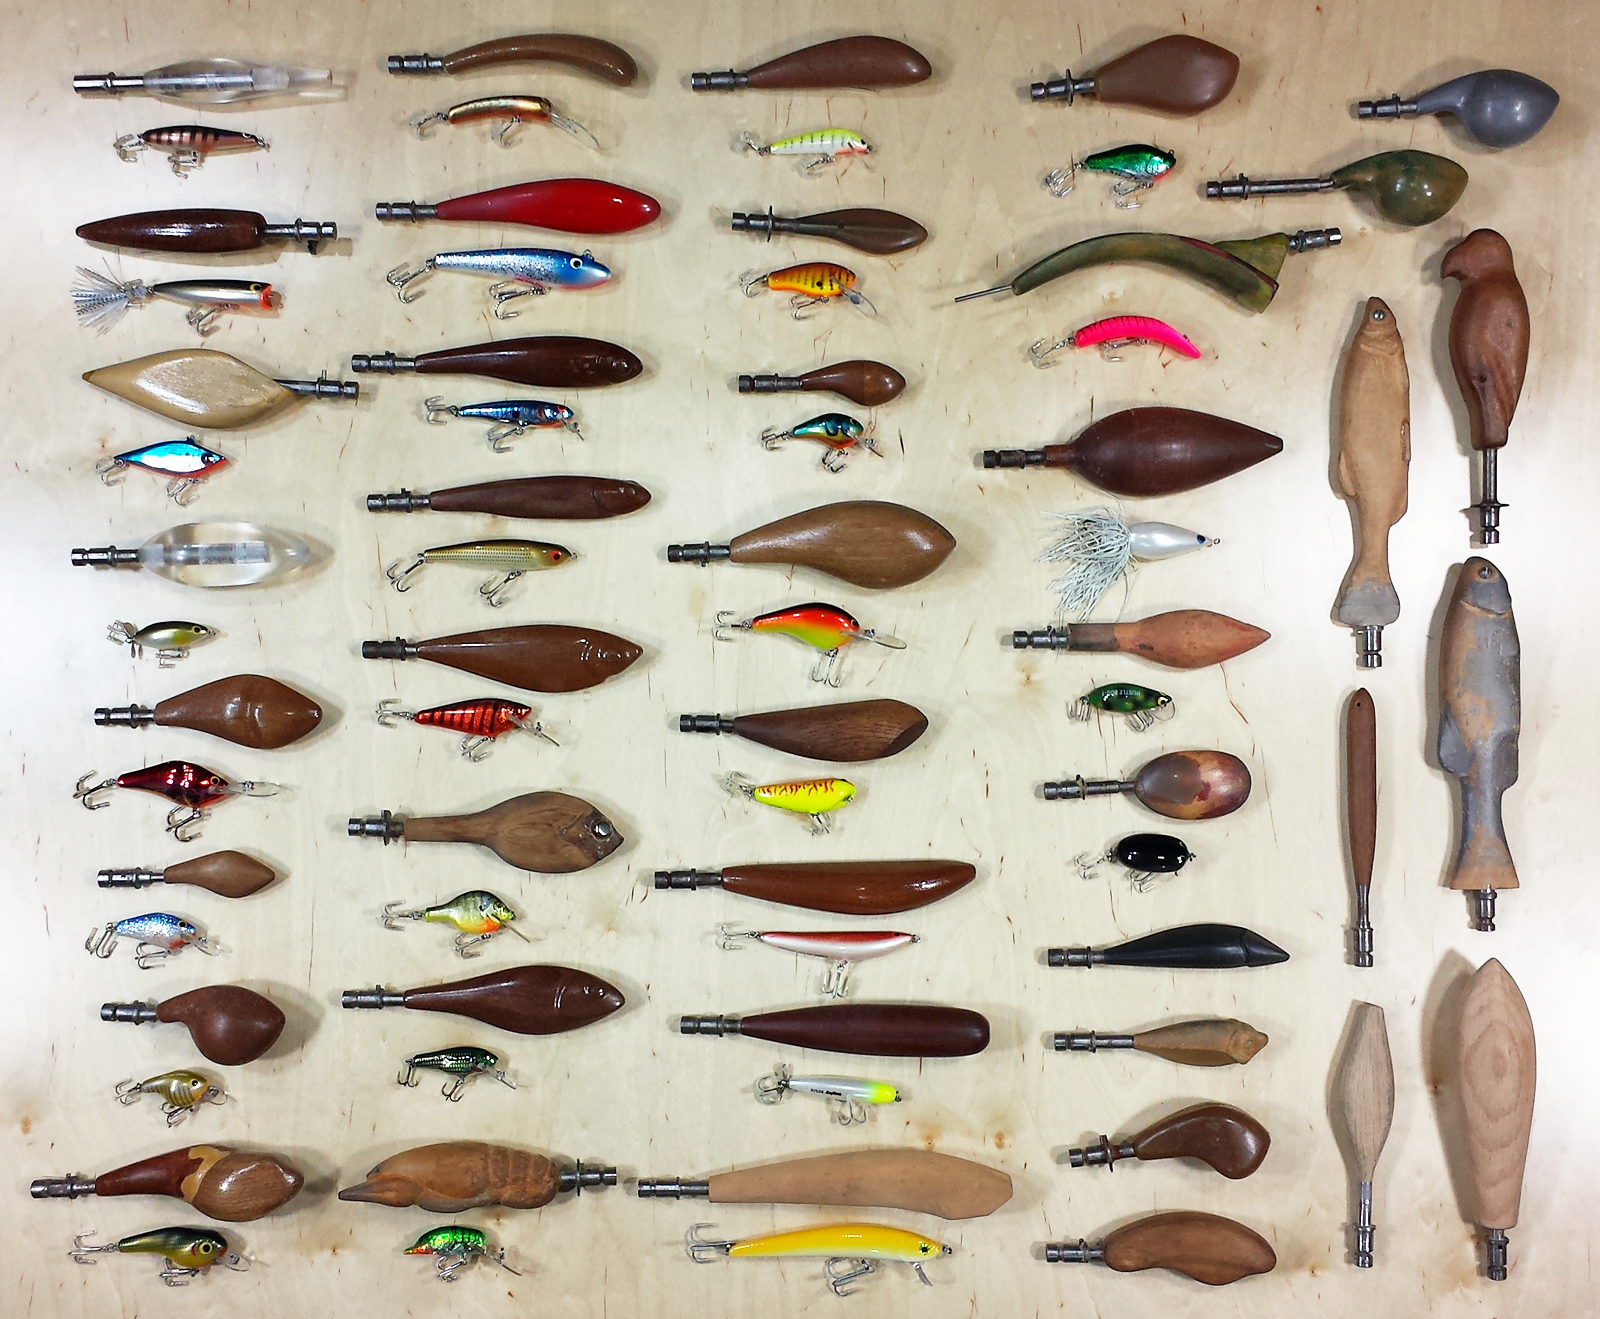 Bill Whitesell's Bagley Lure Collections